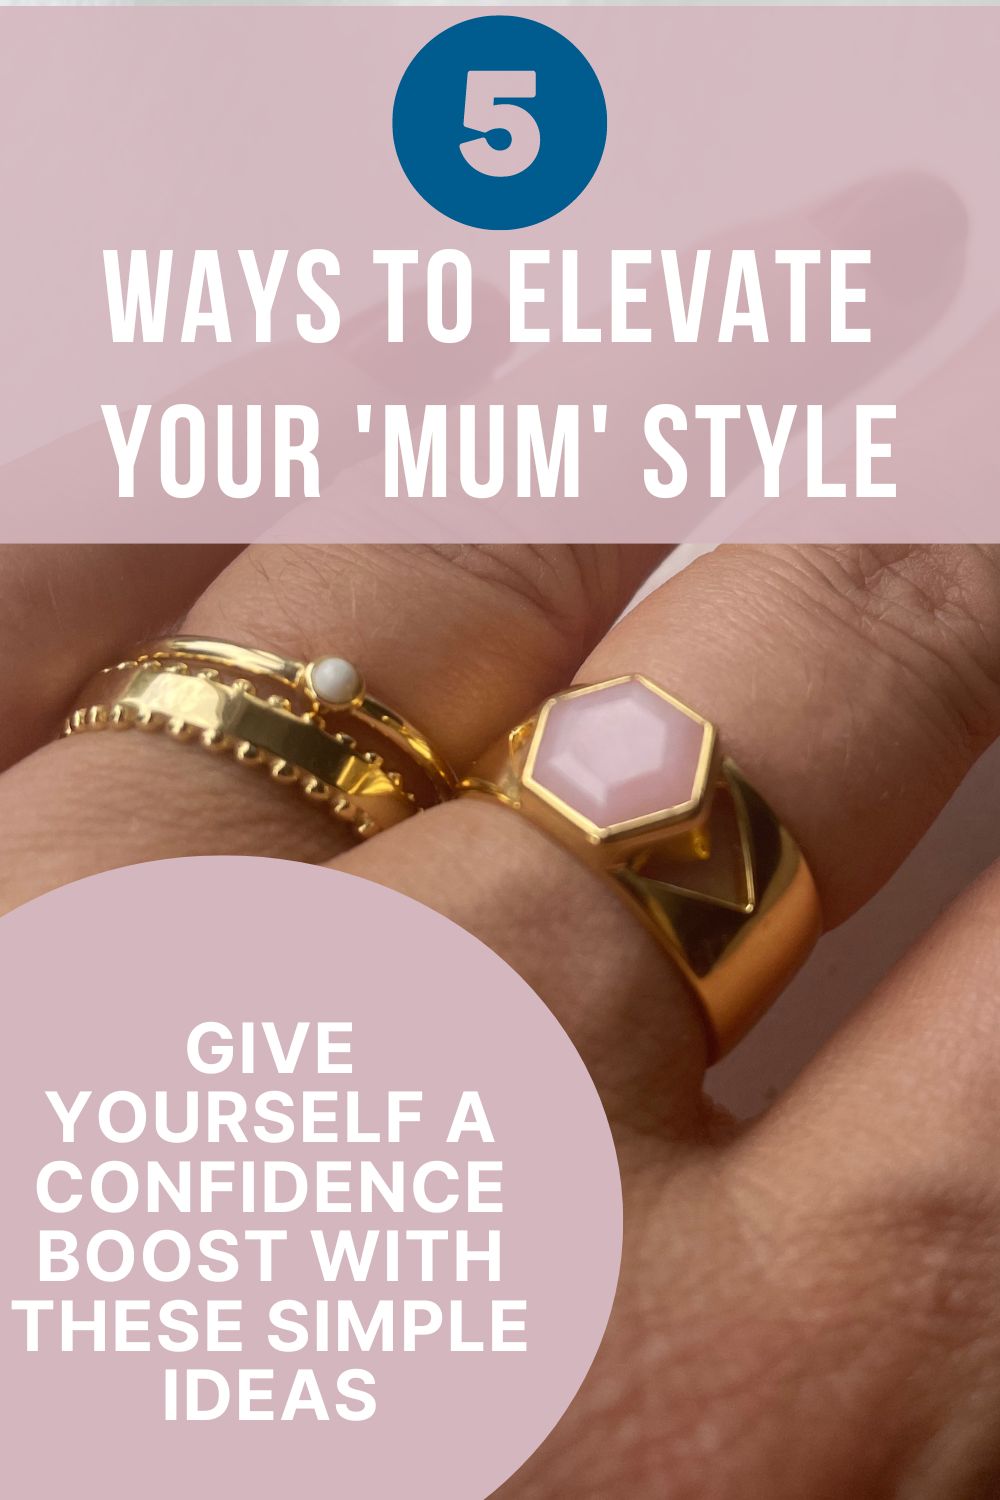 Elevate your mum style